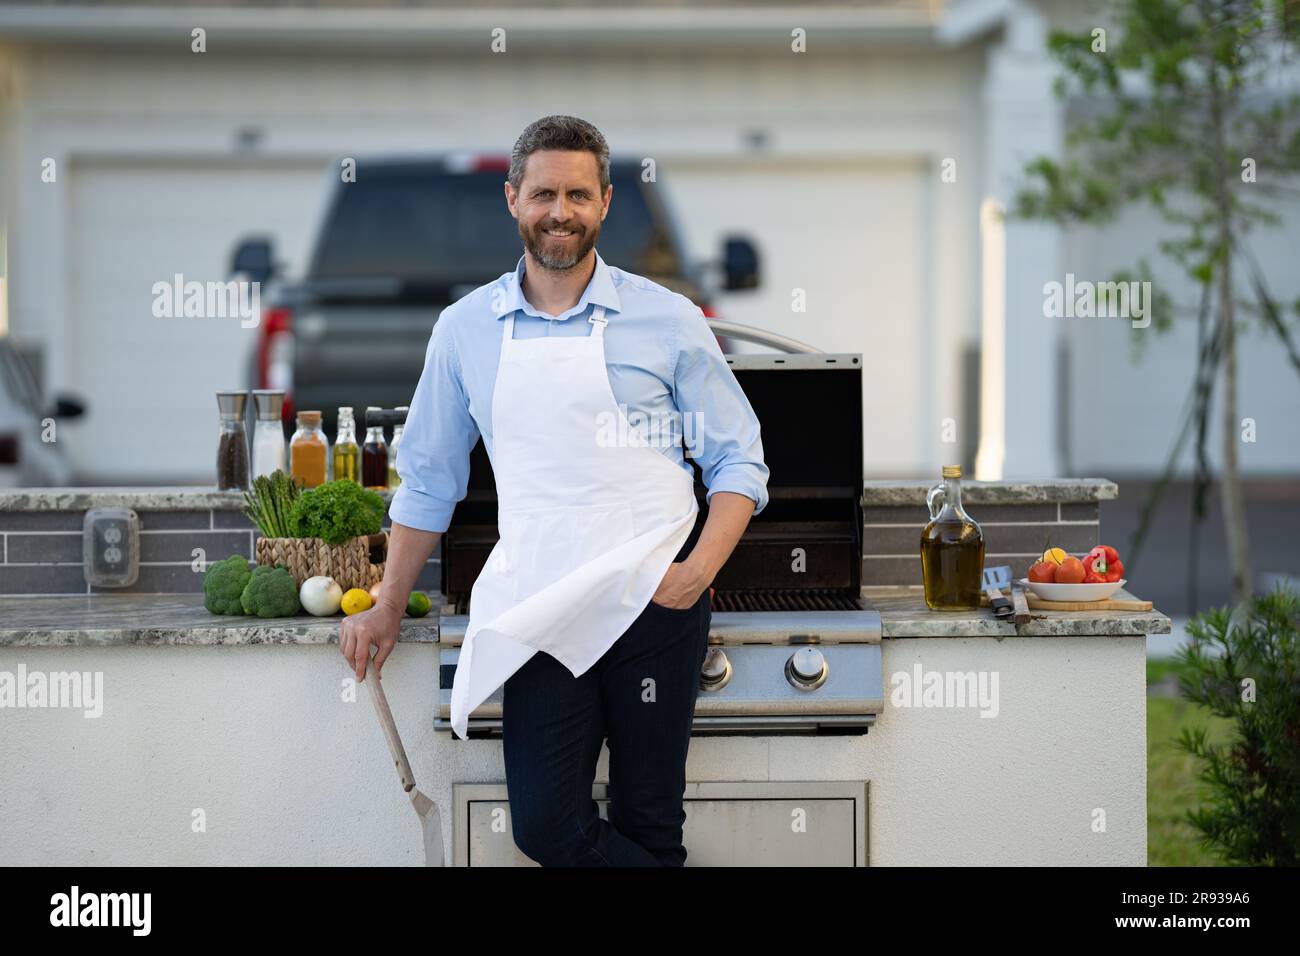 glad cook man at bbq and grill hold utensil. cook man at bbq and grill outdoor. photo of cook man at bbq and grill in apron. cook man at bbq and grill Stock Photo